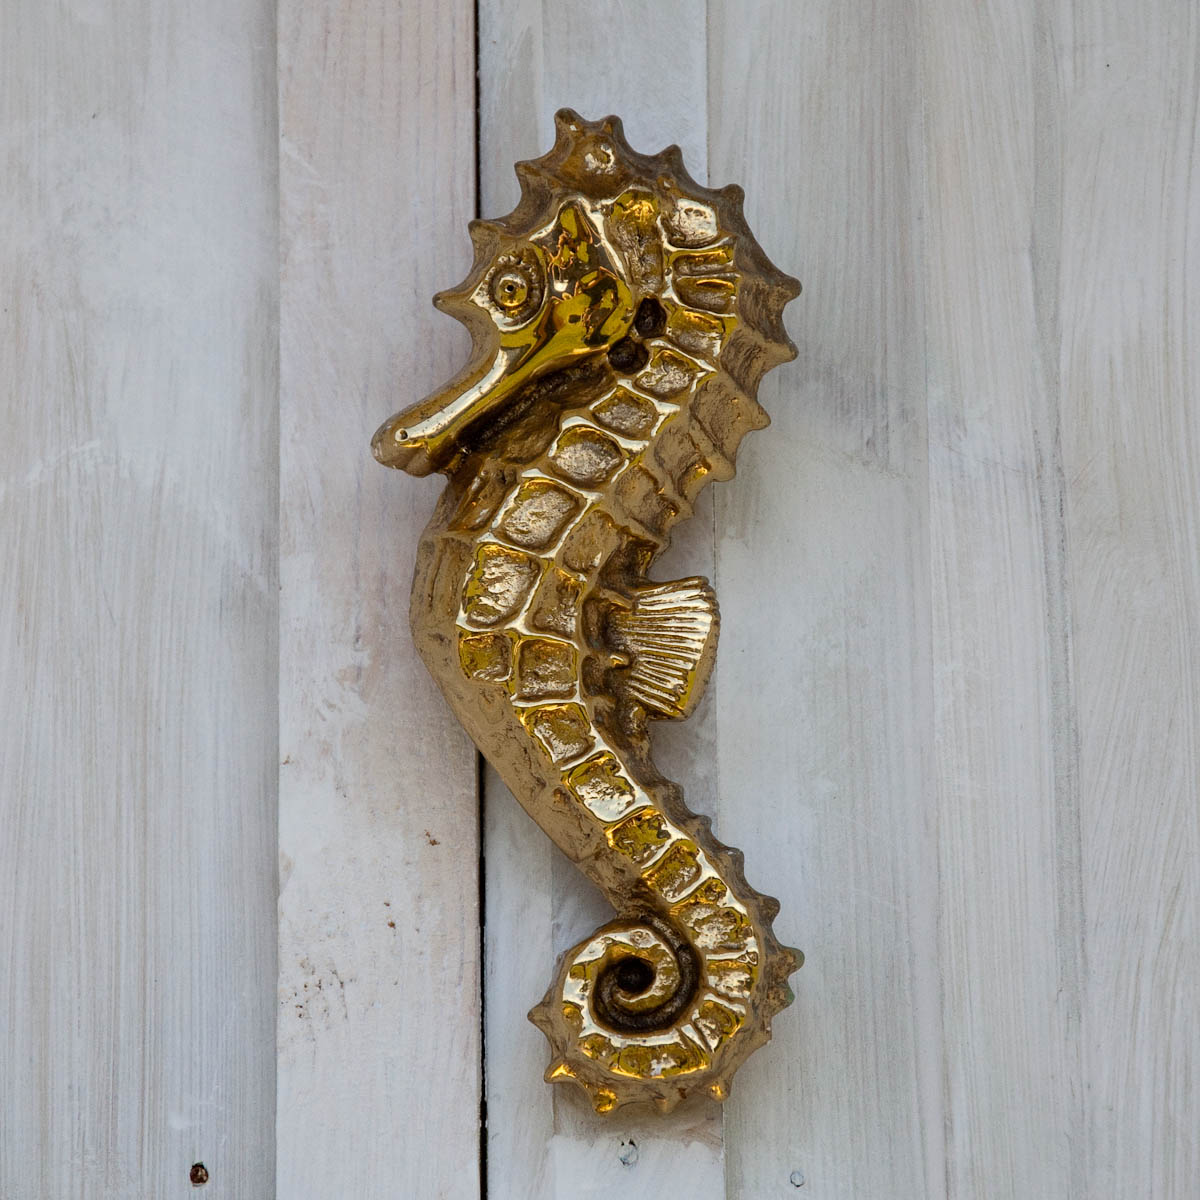 Seahorse ornament on the door of a beach hut, Mersea Island, Essex, England - www.rossiwrites.com